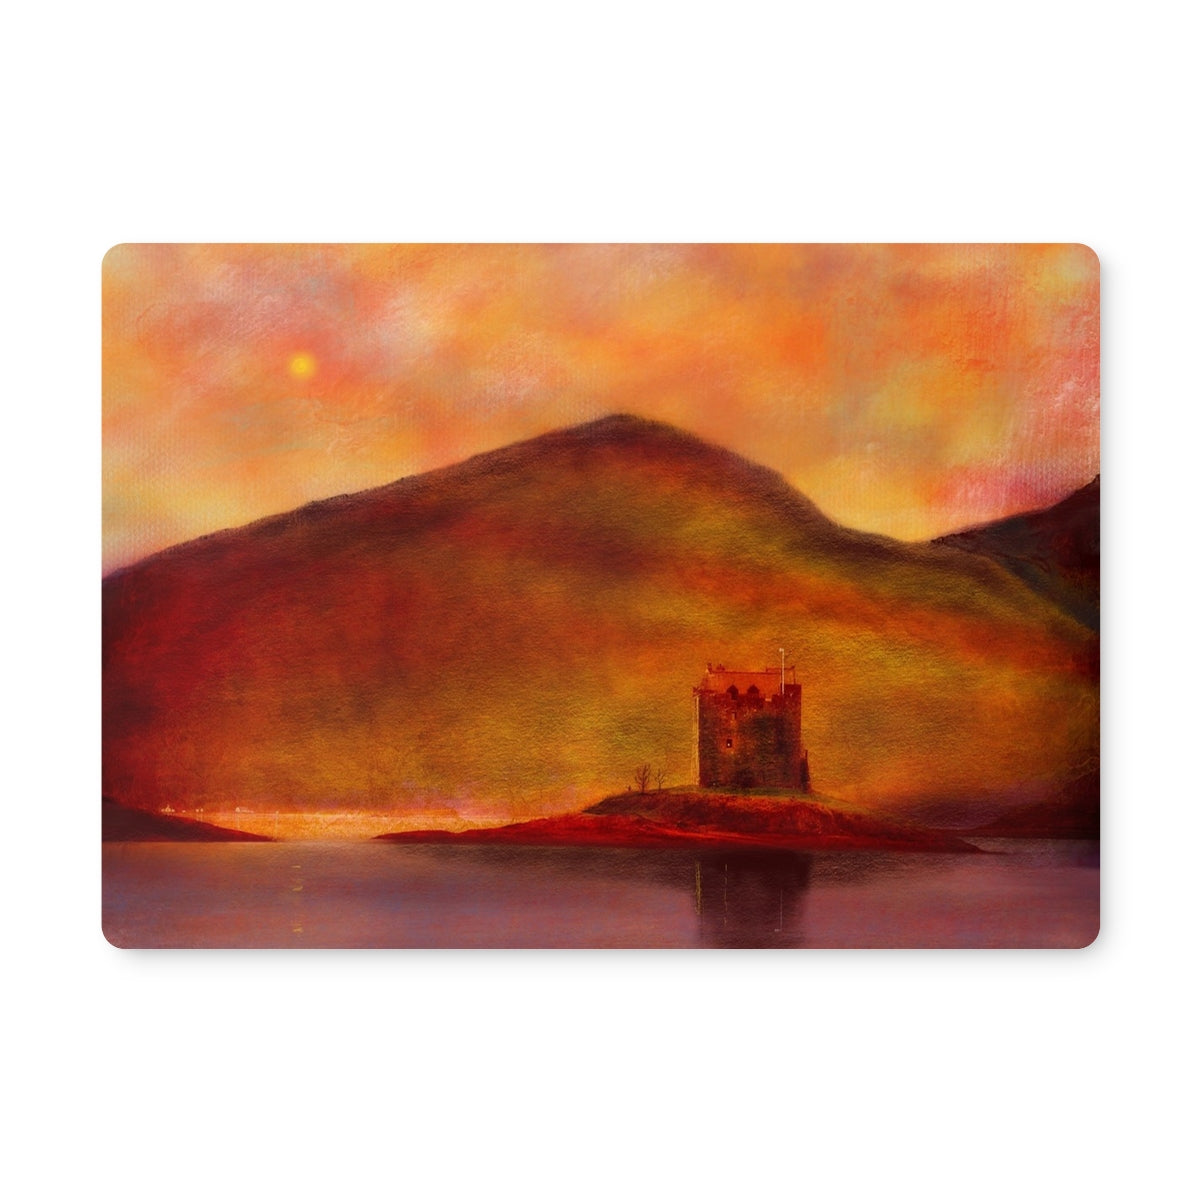 Castle Stalker Sunset Art Gifts Placemat-Placemats-Historic & Iconic Scotland Art Gallery-2 Placemats-Paintings, Prints, Homeware, Art Gifts From Scotland By Scottish Artist Kevin Hunter